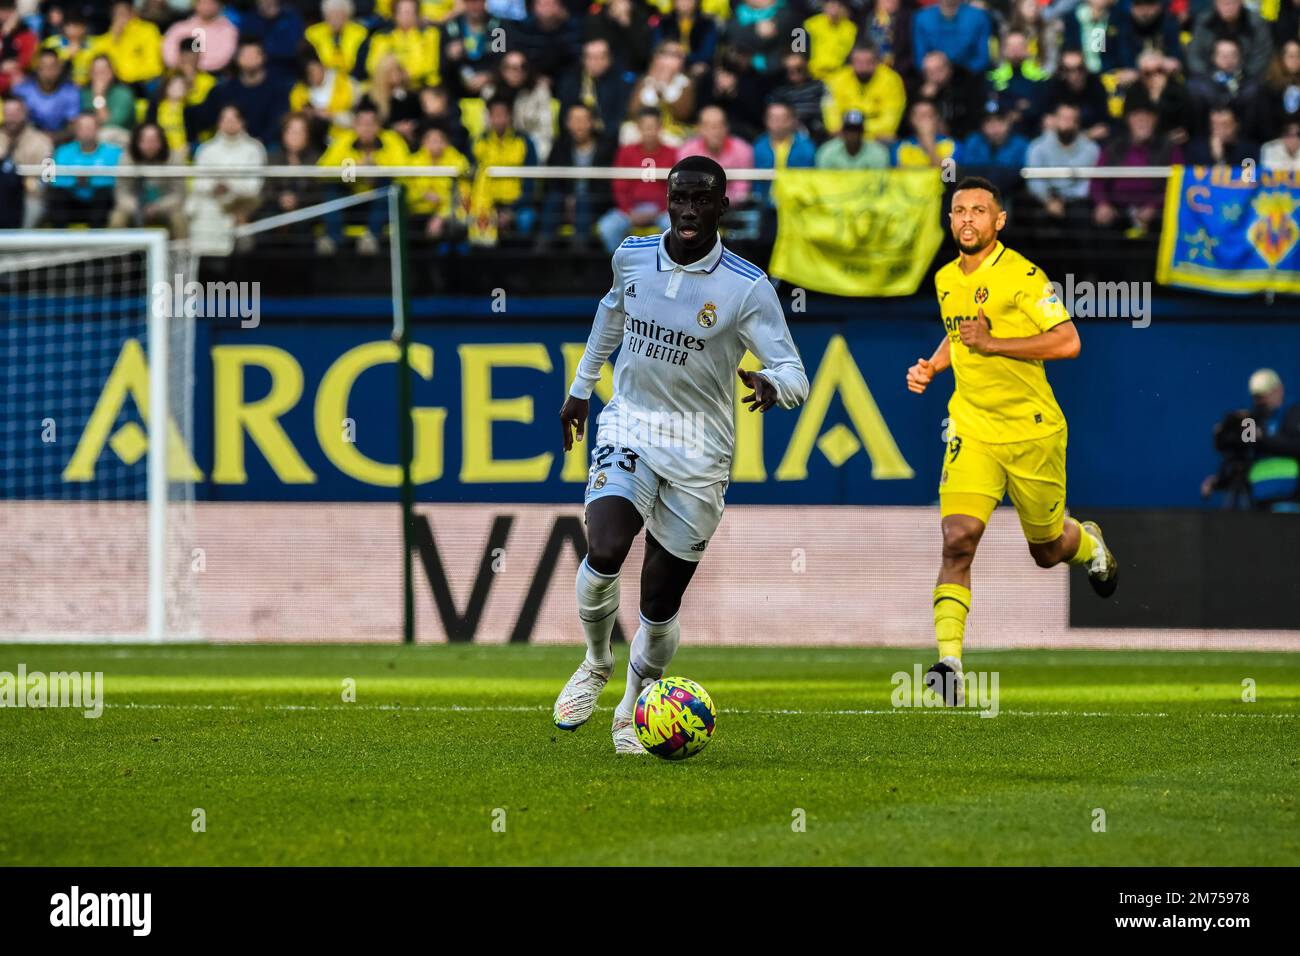 VILLARREAL, SPAIN - JANUARY 7: Ferland Mendy of Real Madrid CF looking the next pass during the match between Villarreal CF and Real Madrid CF of La Liga Santander on January 7, 2023 at Estadi de la Ceramica in Villarreal, Spain. (Photo by Samuel Carreño/ PX Images) Credit: Px Images/Alamy Live News Stock Photo